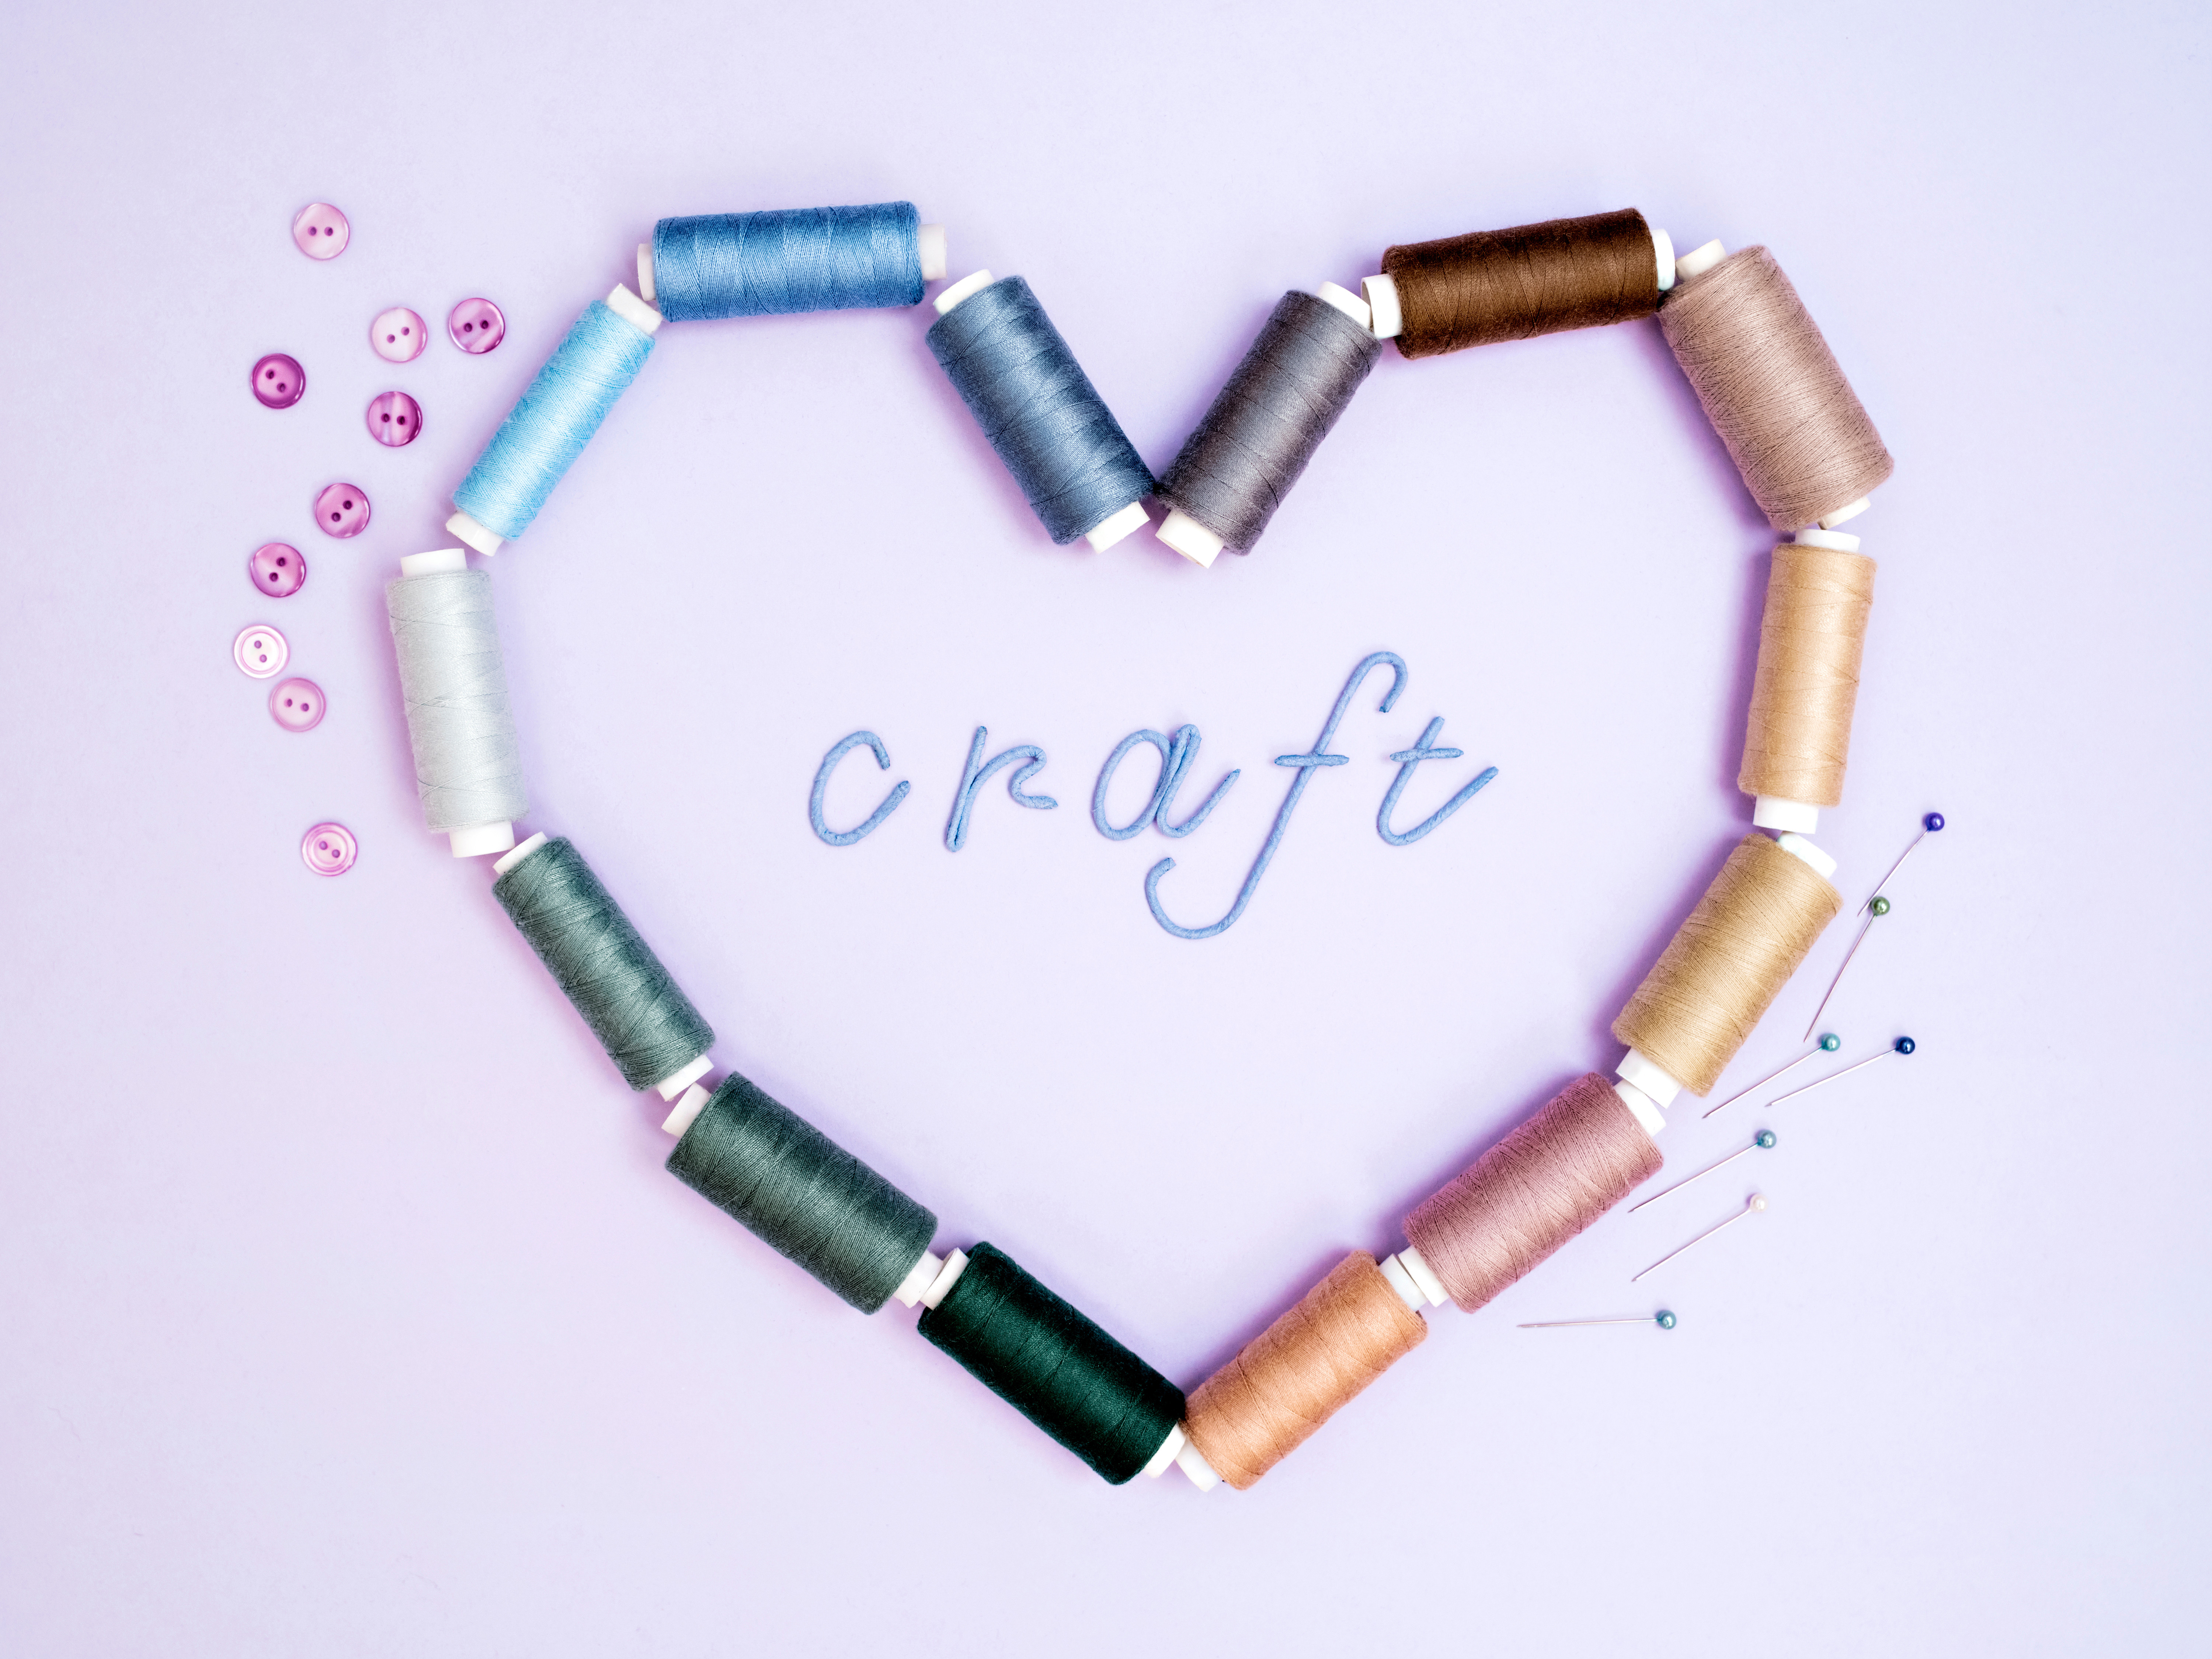 Super-simple crafting event joins slate of artsy activities at the FDL Public Library